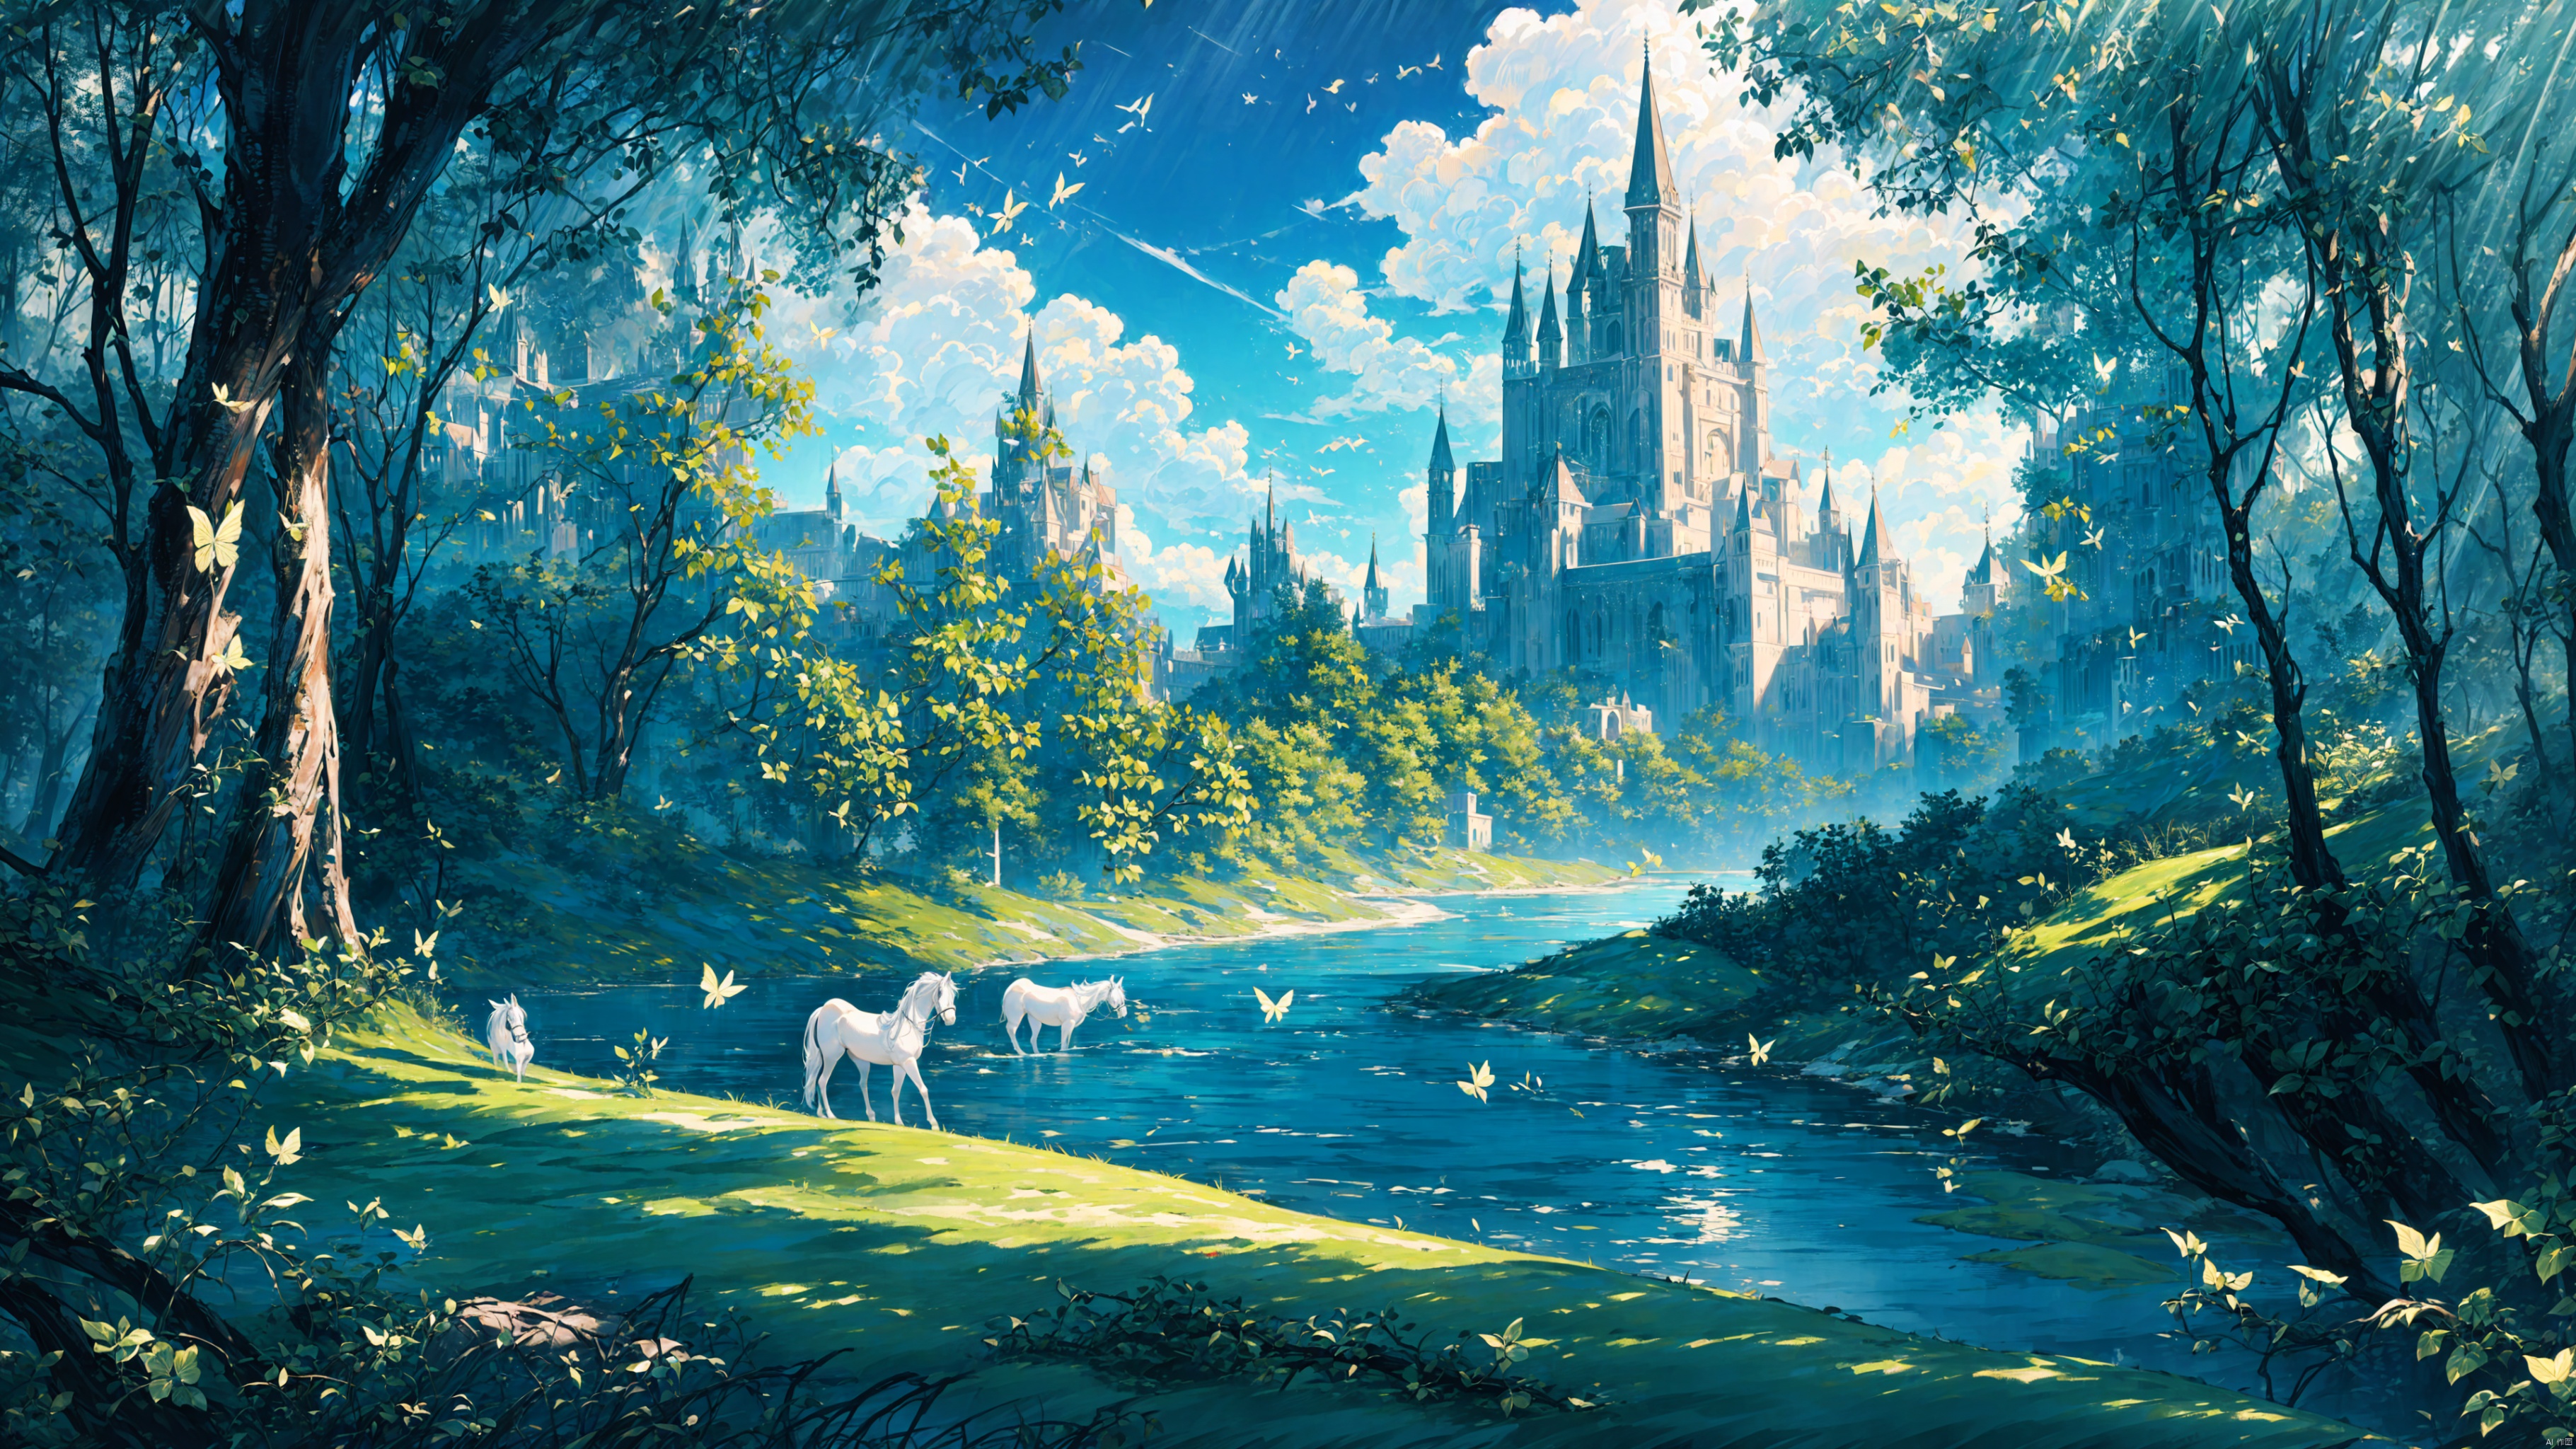  A magic castle,(castle:Panoramic display:1.3),Best quality, 8k, cg,Completely independent castle with no other buildings around it,Show the complete castle, not the buildings close to the camera,The huge castle dominates the picture,Masterpiece, Best quality,Blue sky, white clouds, breeze, moat, lush woods, sunny,

horses outside the castle, horses drinking by the river, cavalry patrolling the forest, a world of magic, dragons in the sky,